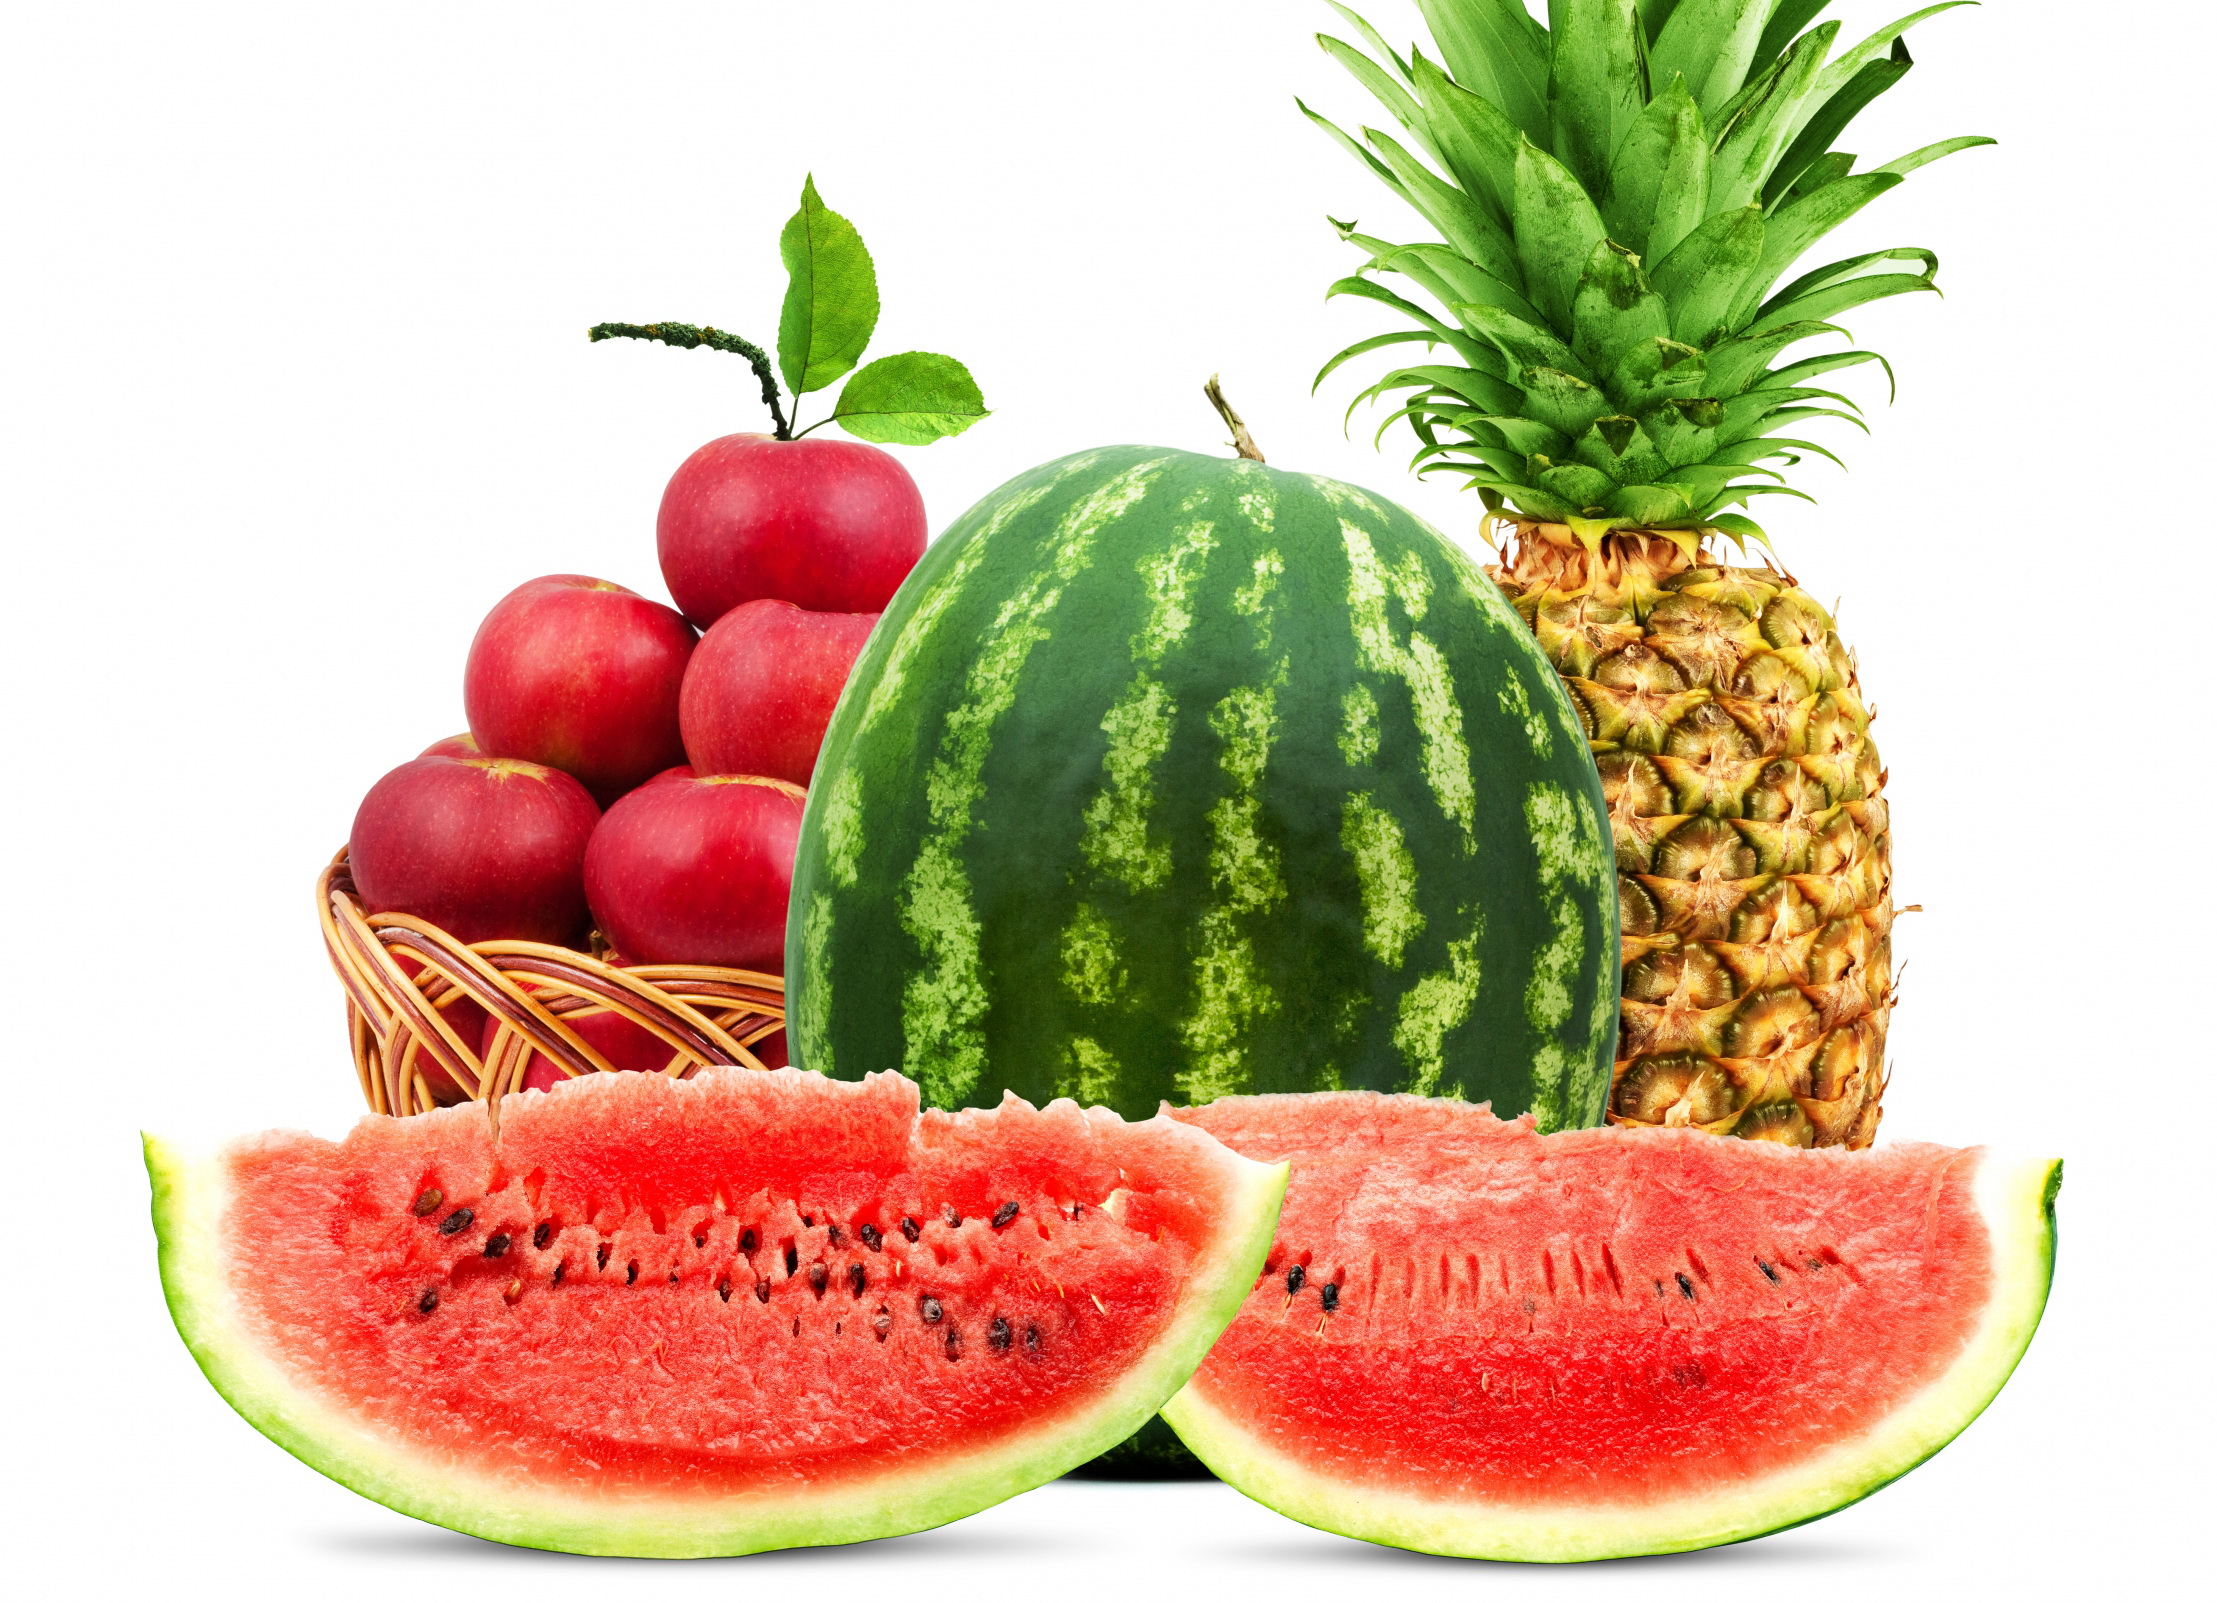 Pineapple And Watermelon Fruits - HD Wallpaper 